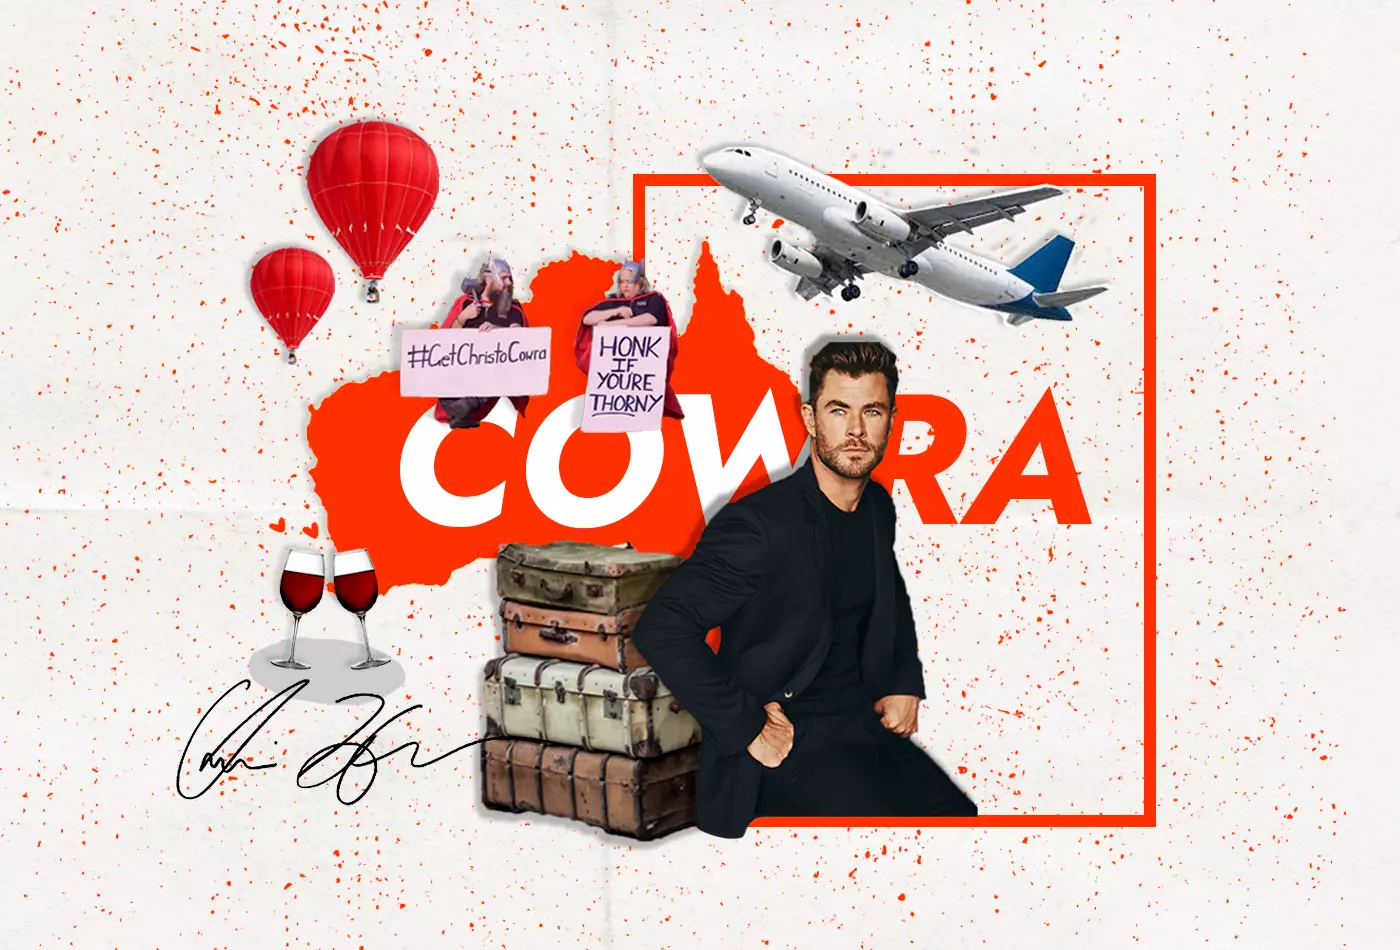 Cowra Tourism’s alluring ad campaign attracts Chris Hemsworth's attention